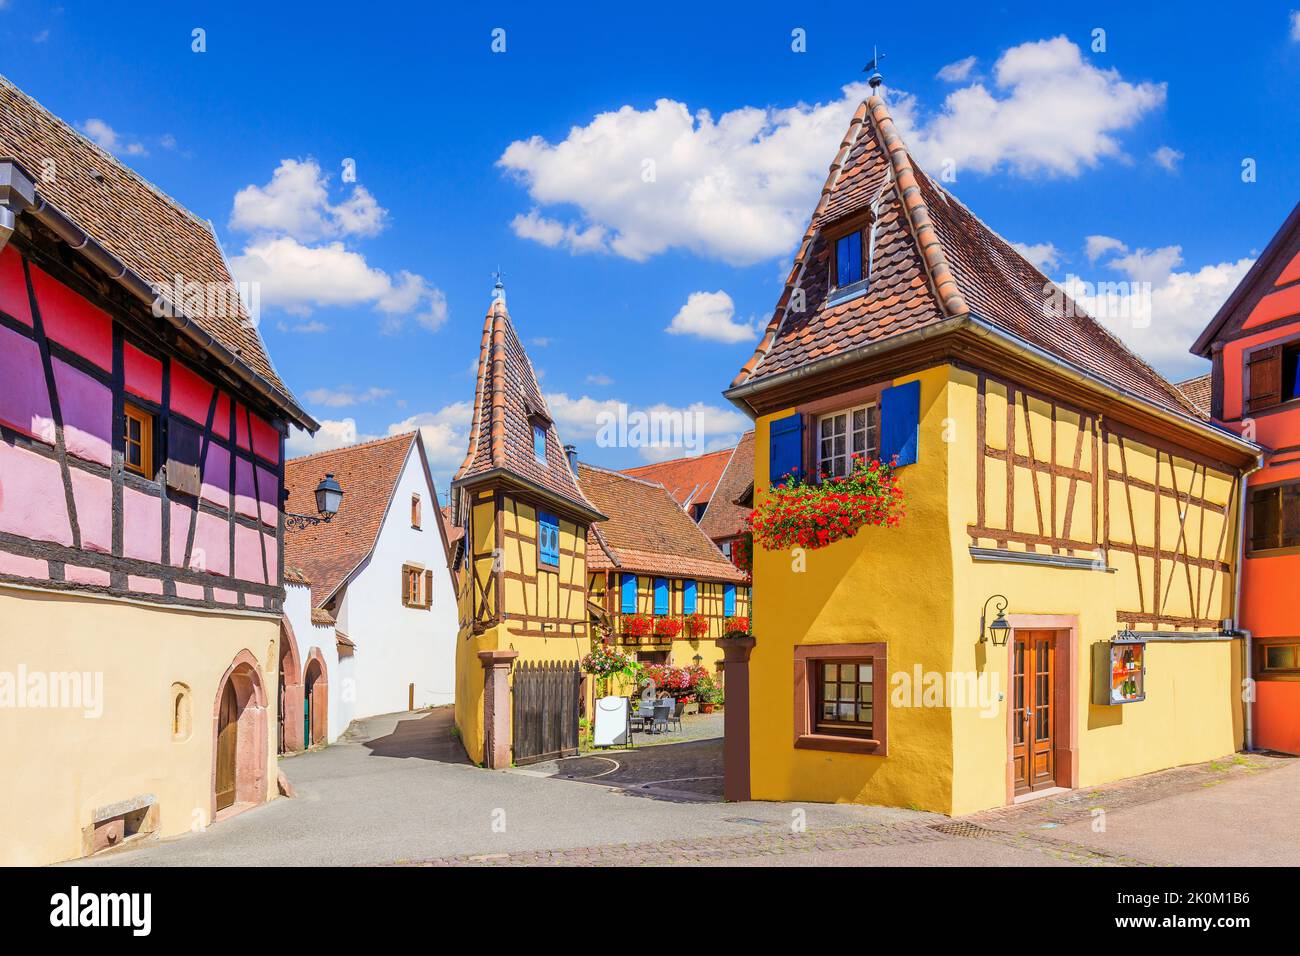 Eguisheim, France. Colorful half-timbered houses in Alsace. Stock Photo